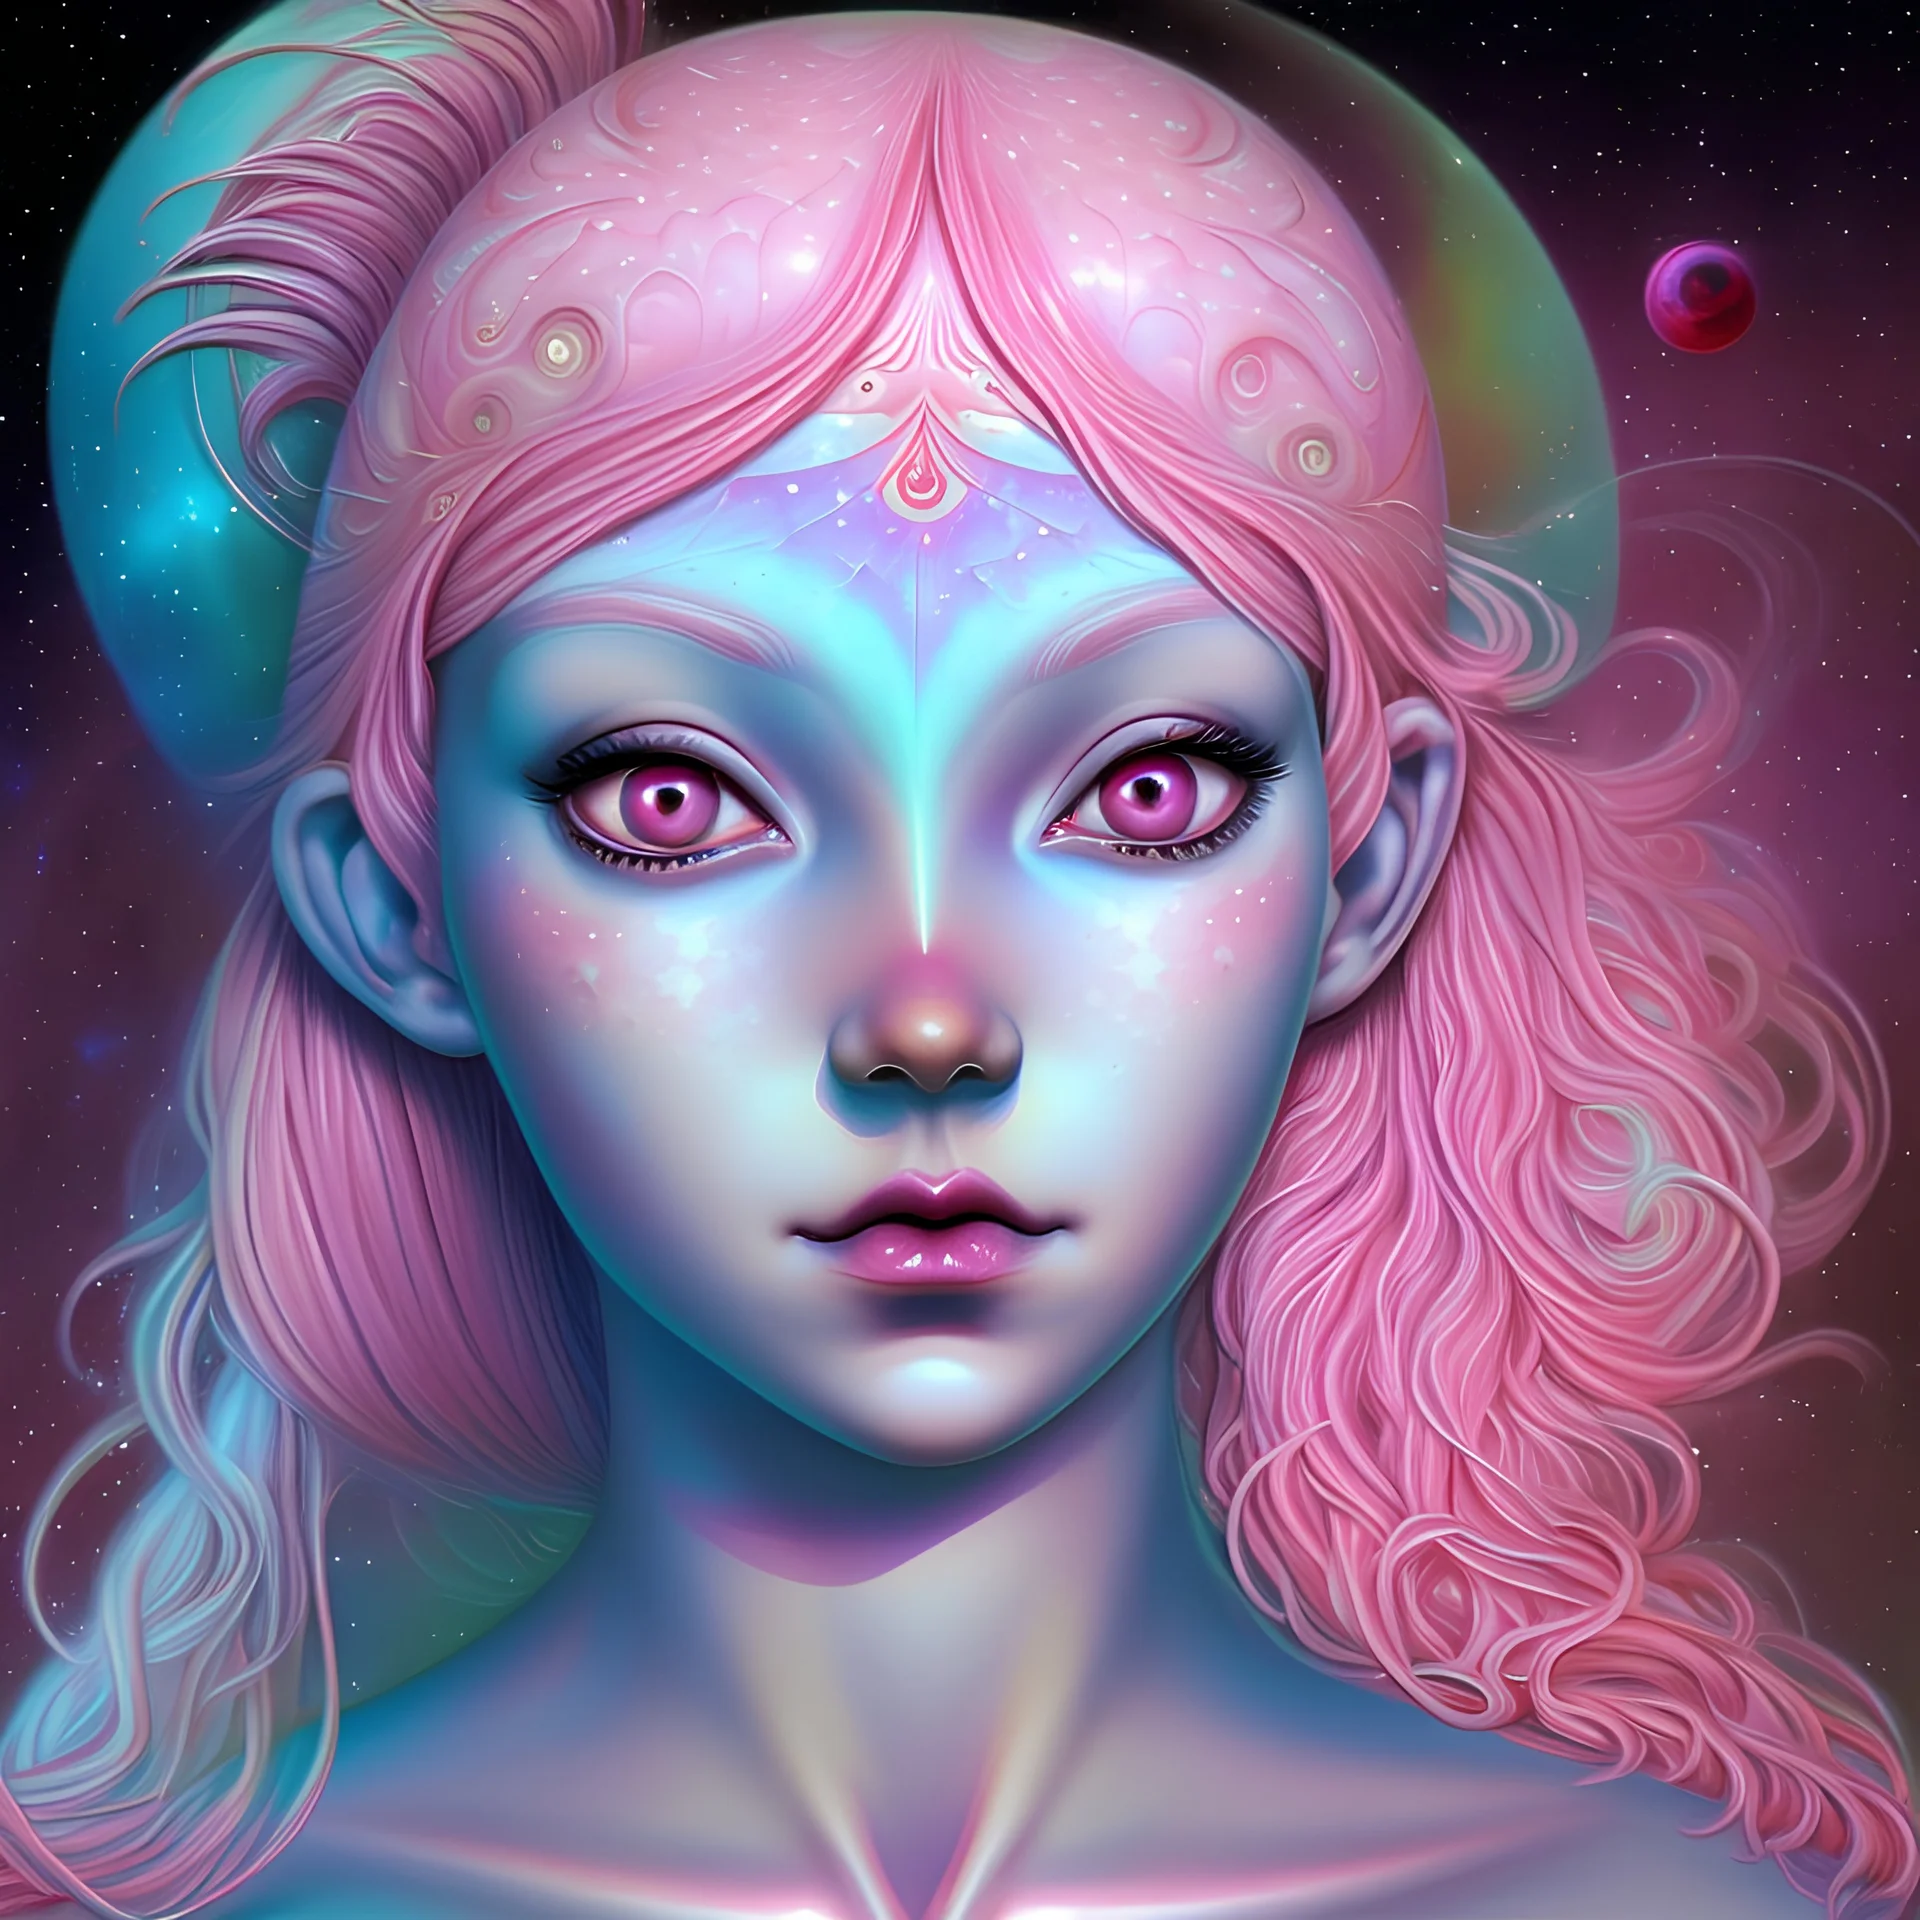 cosmic girl with a third eye in the middle of her forehead and pink hair, detailed, fractal